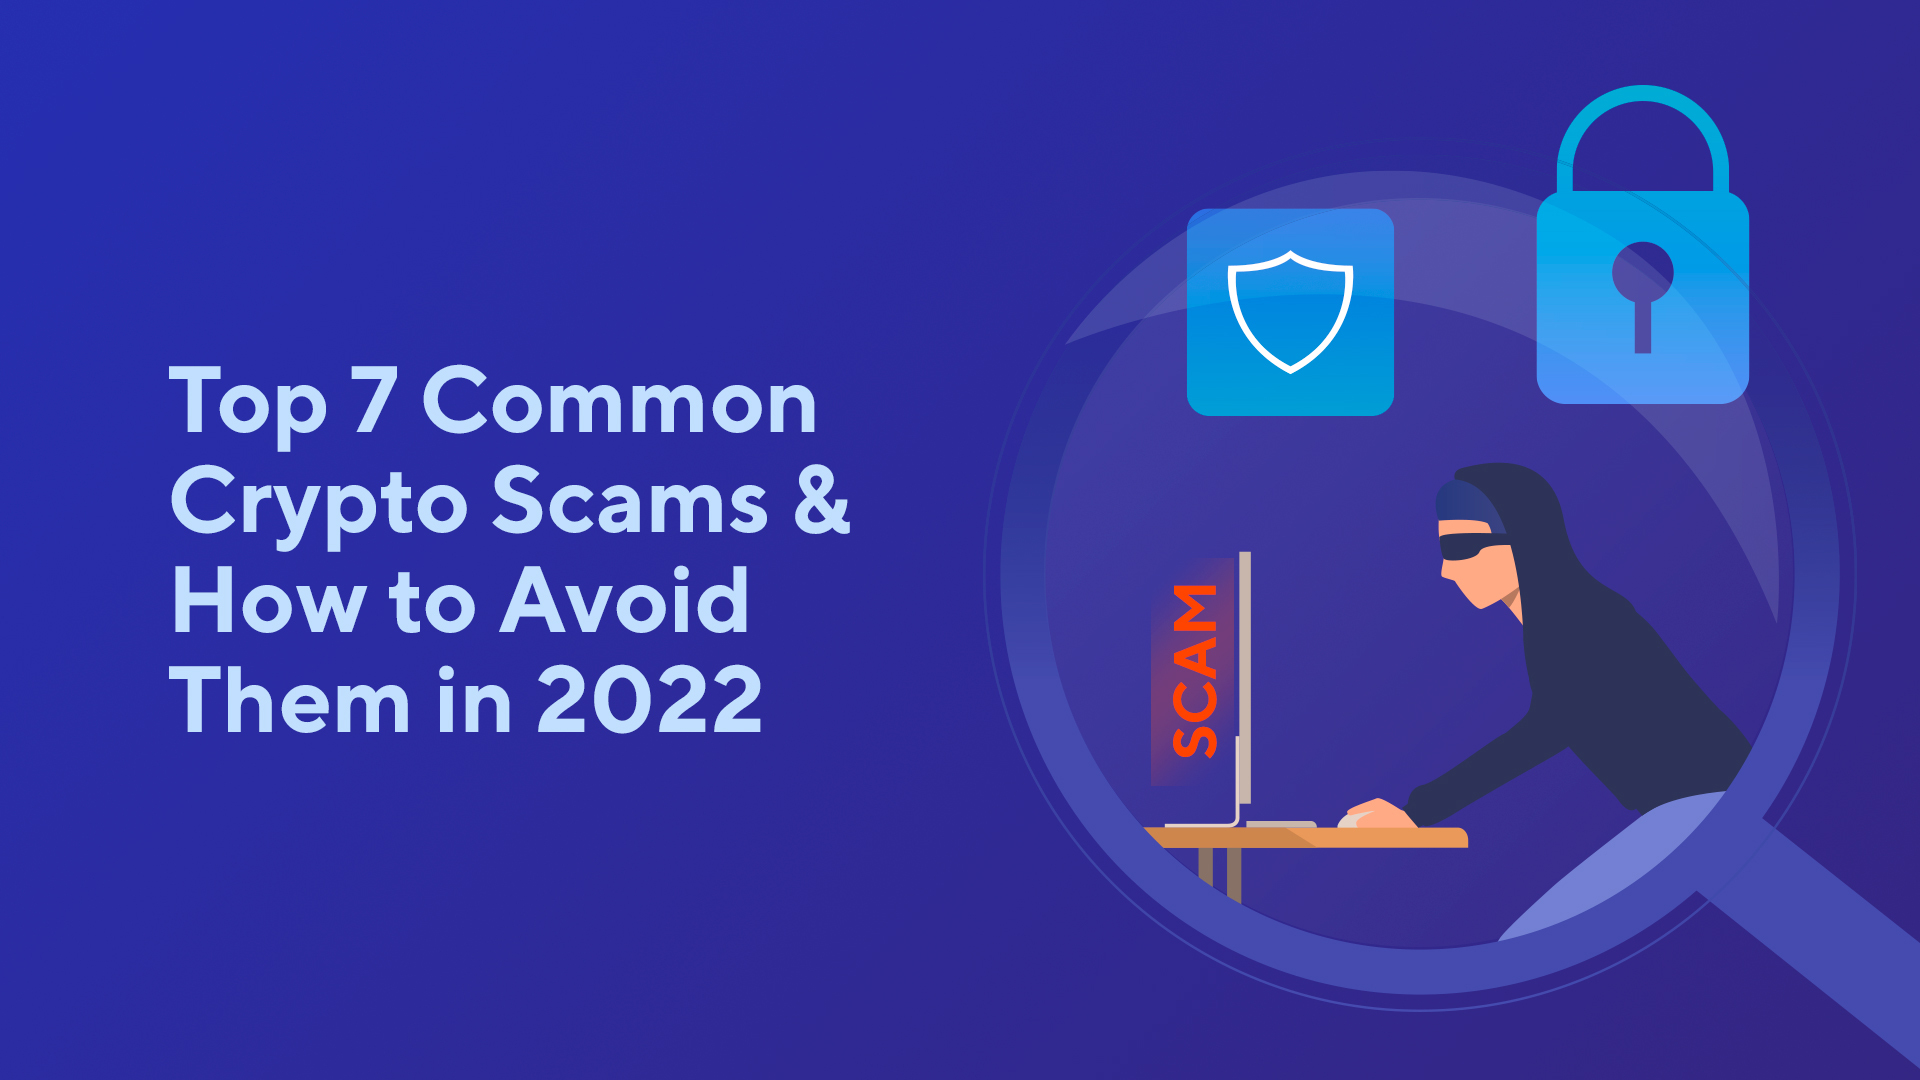 Top 7 Common Crypto Scams & How to Avoid Them in 2022